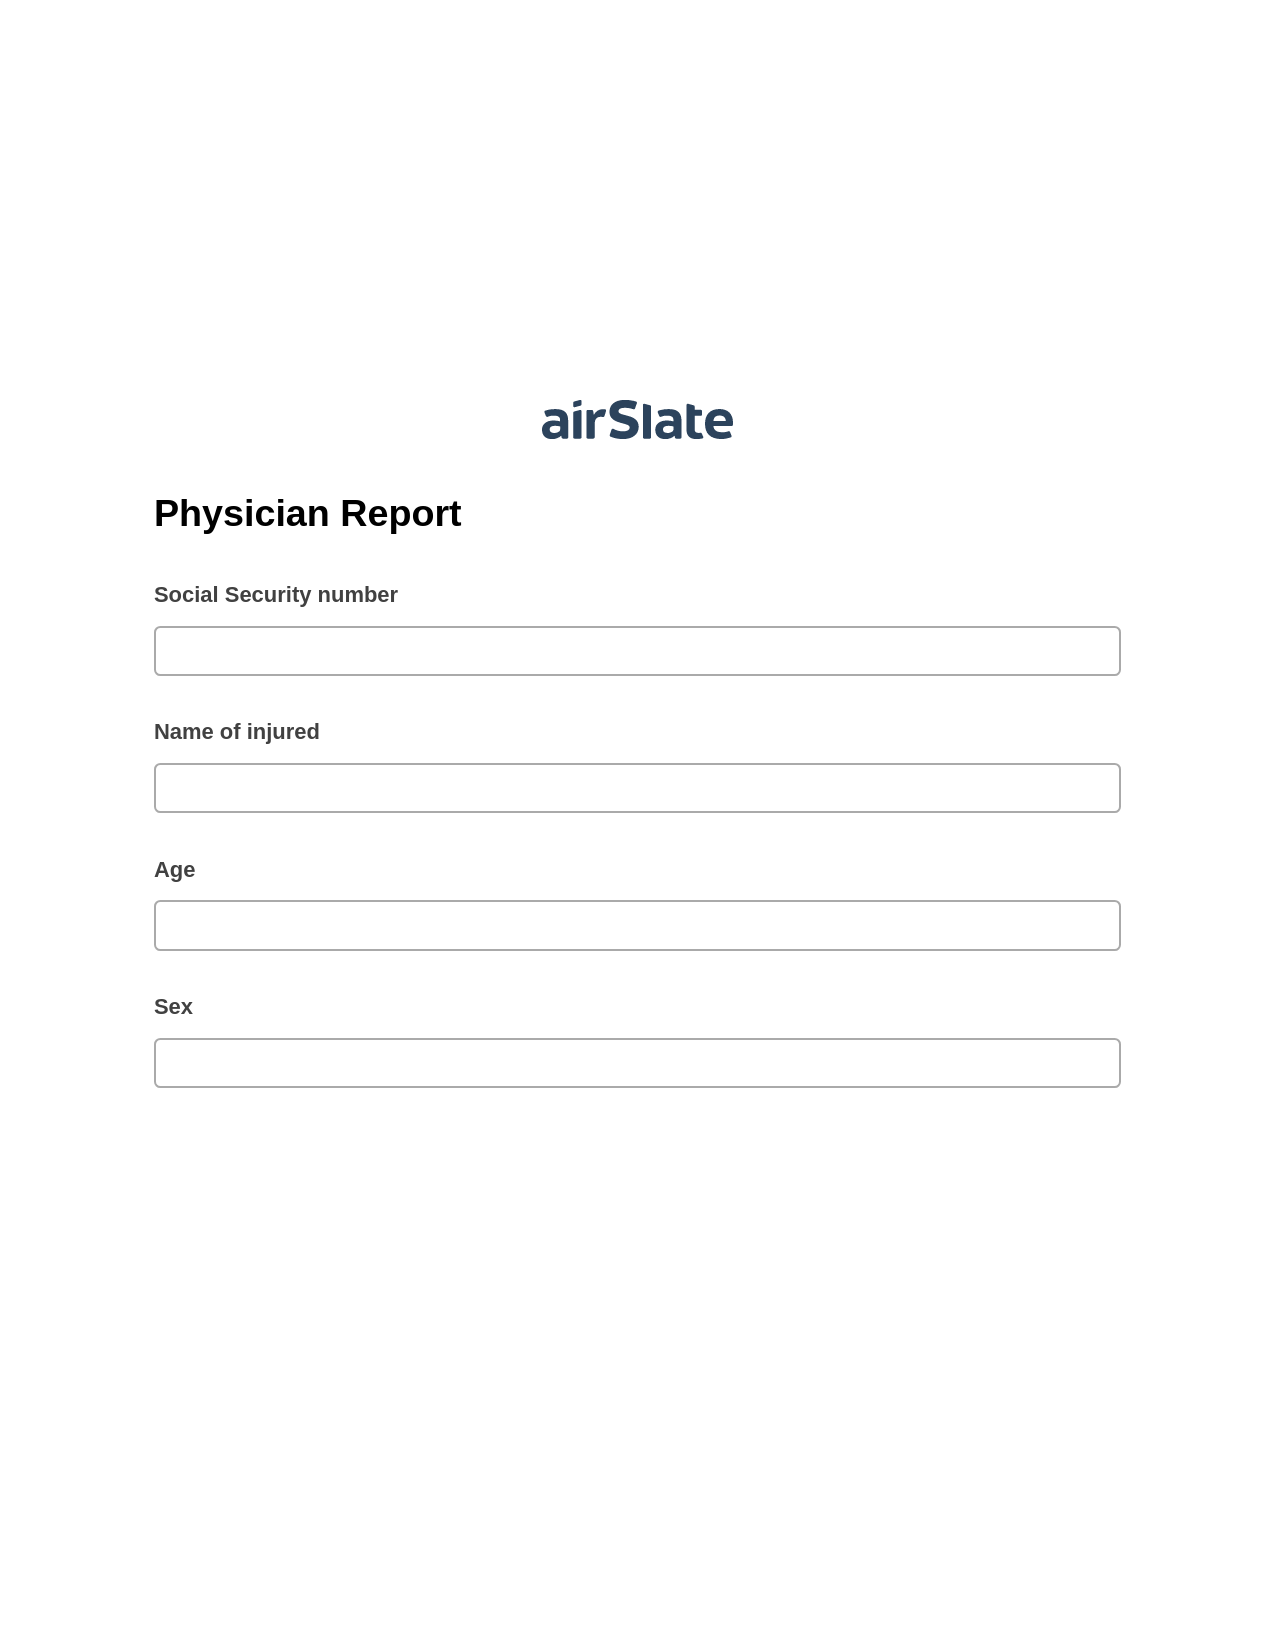 Multirole Physician Report Pre-fill from Salesforce Records Bot, Update NetSuite Record Bot, Post-finish Document Bot